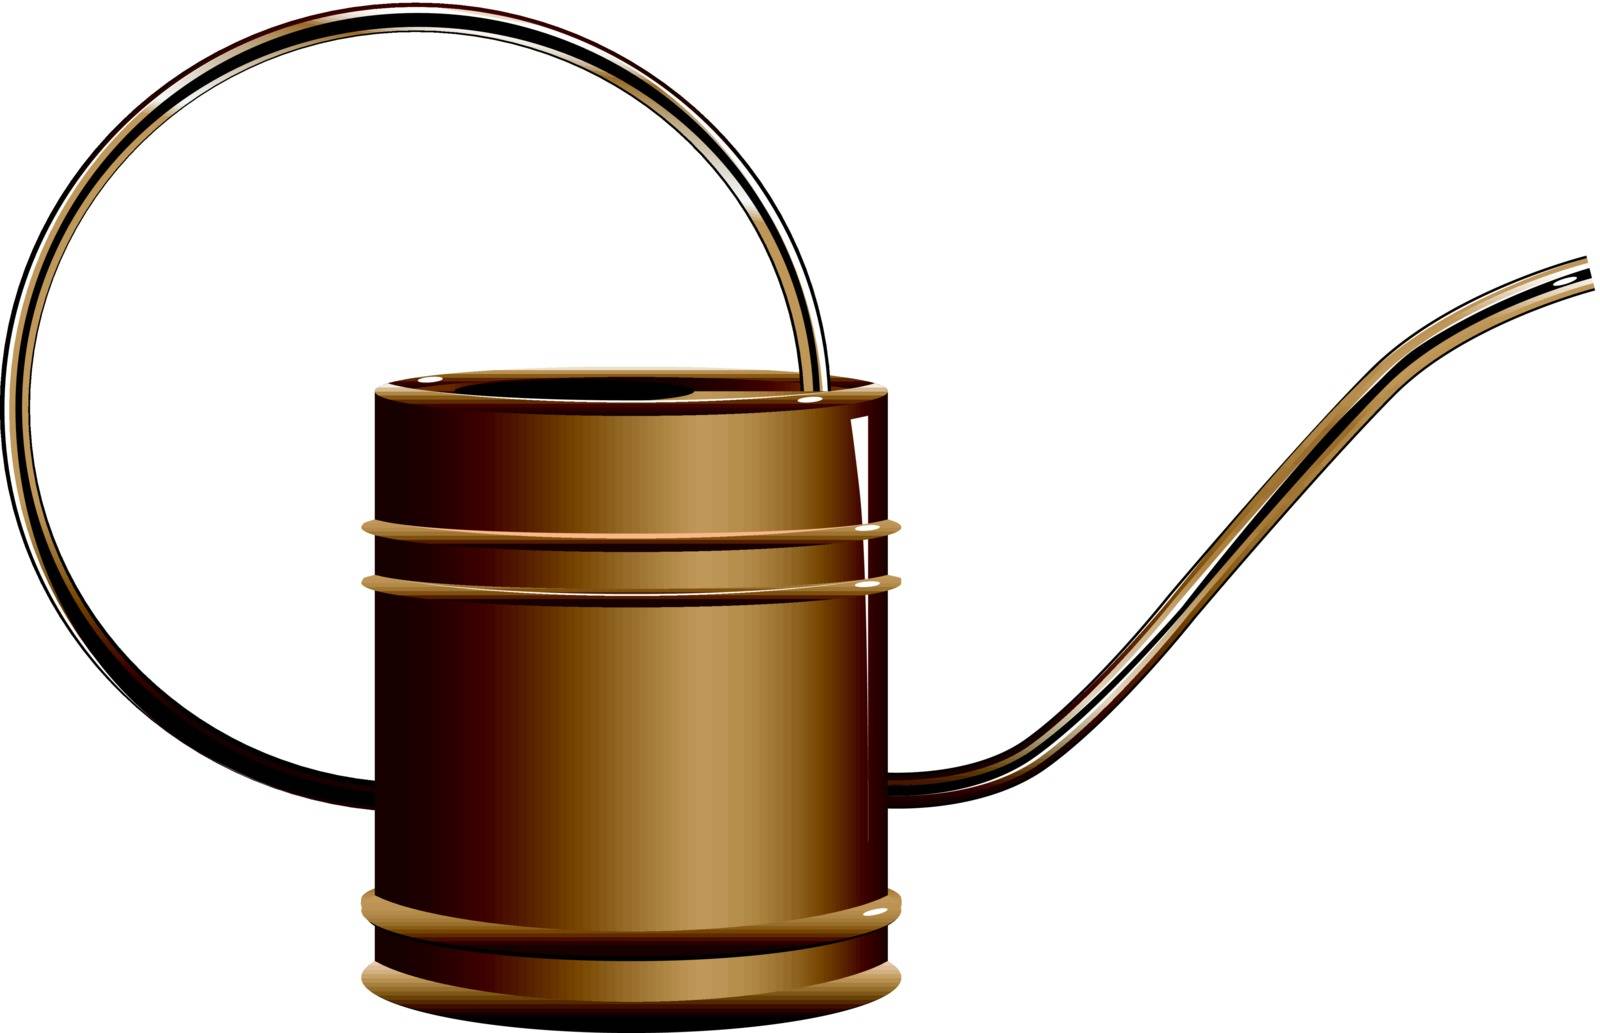 Copper watering can for watering on a personal plot. Vector illustration.